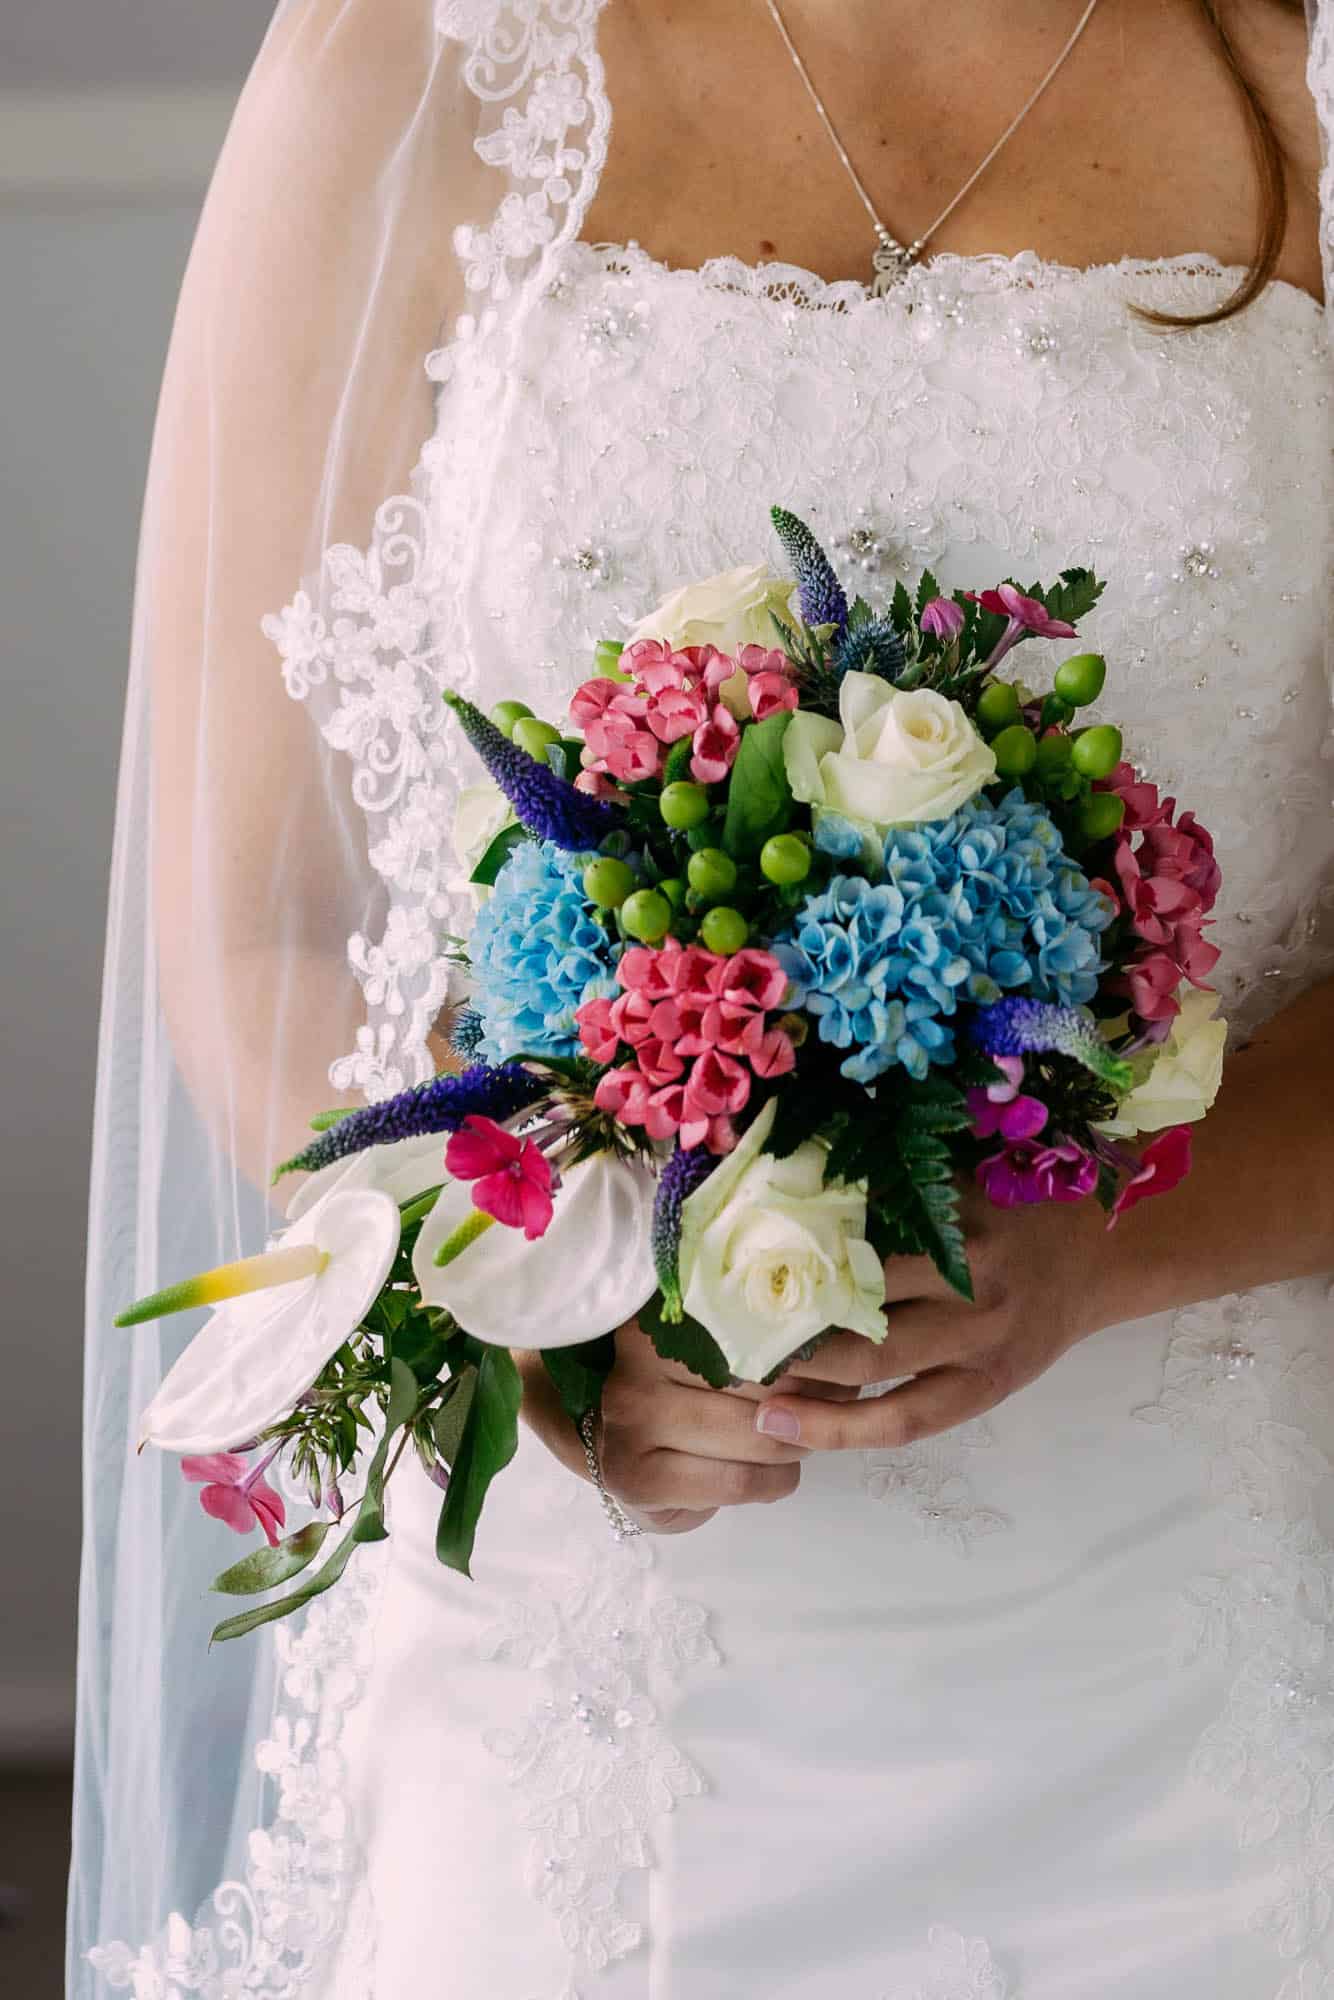 A bride with a wedding bouquet full of colourful flowers.